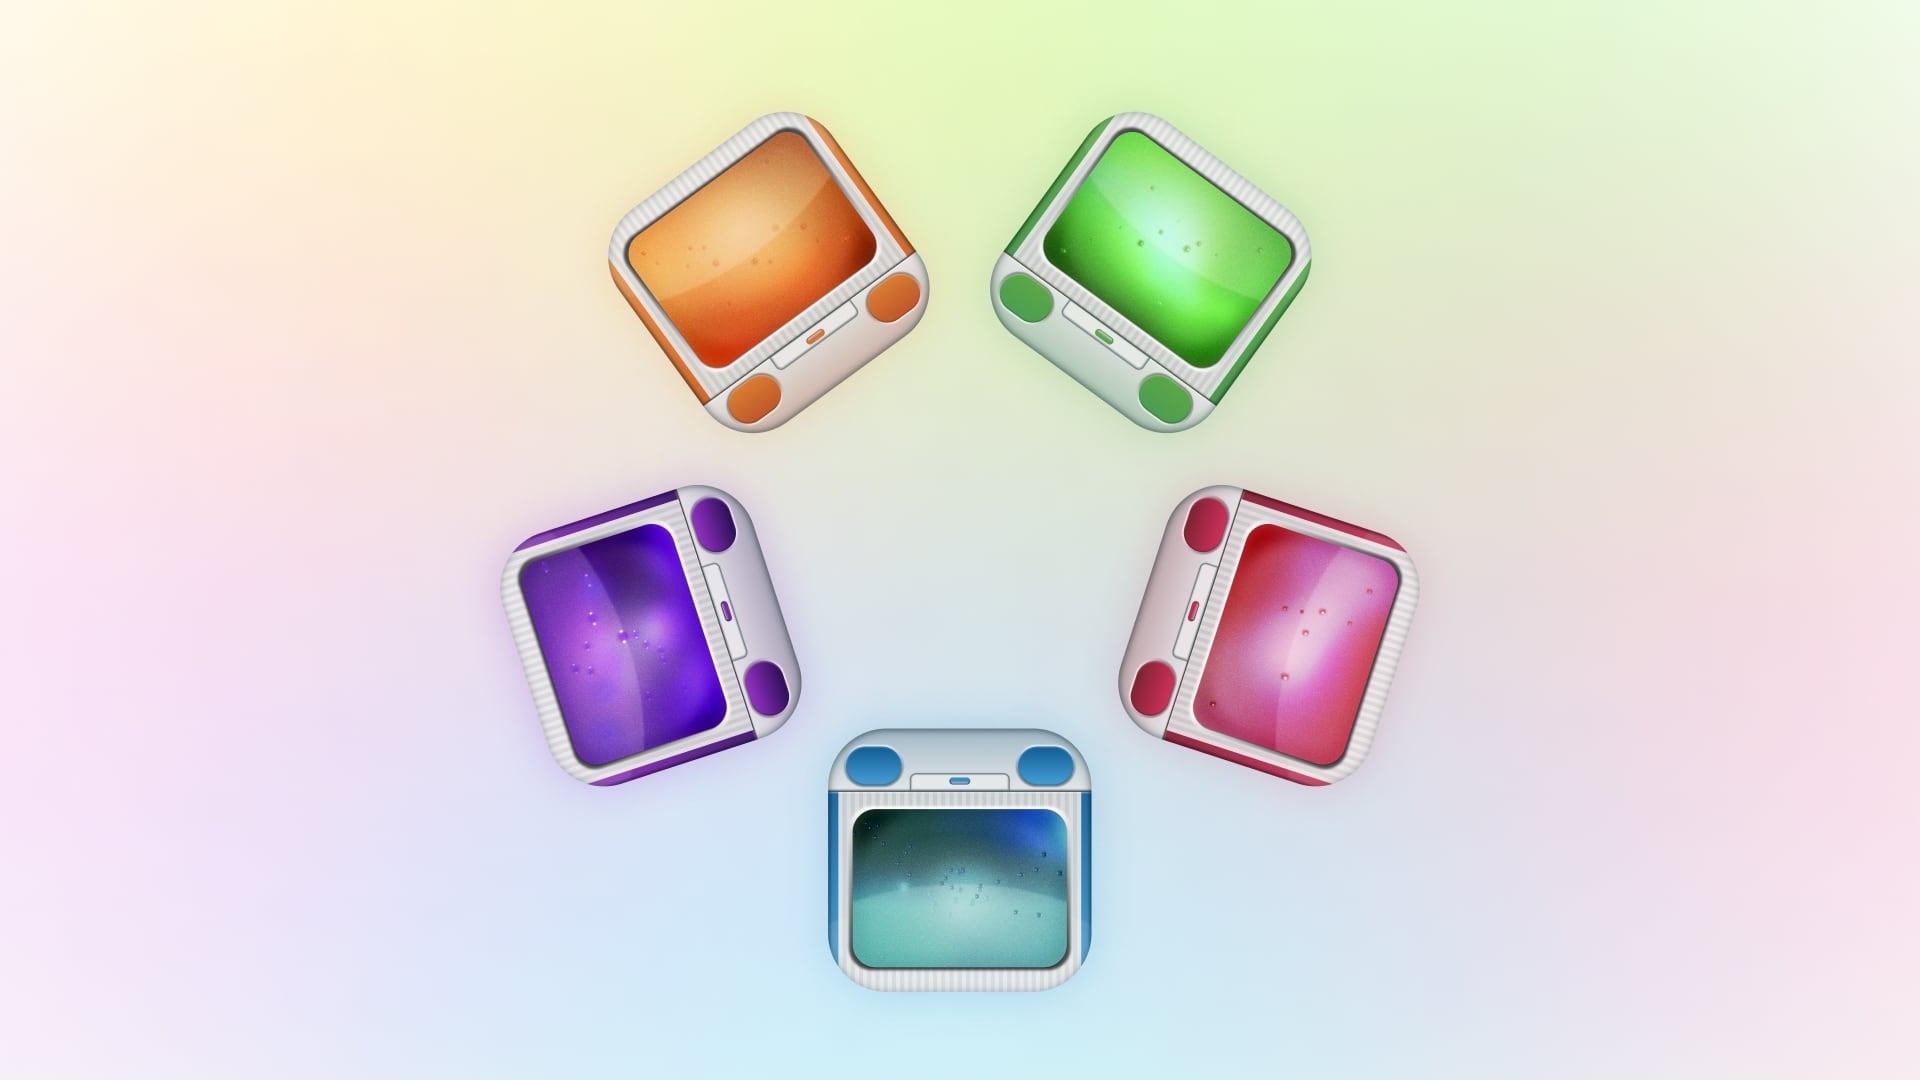 Five iOS-style app icons arranged in a flower-like circle. Each icon resembles an old iMac--translucent, light-grey, pinstriped plastic with a large screen over small speakers and a disc drive. Each iMac is a different color: 'tangerine' orange, 'lime' green, 'strawberry' pink, 'blueberry' blue, and 'grape' purple.